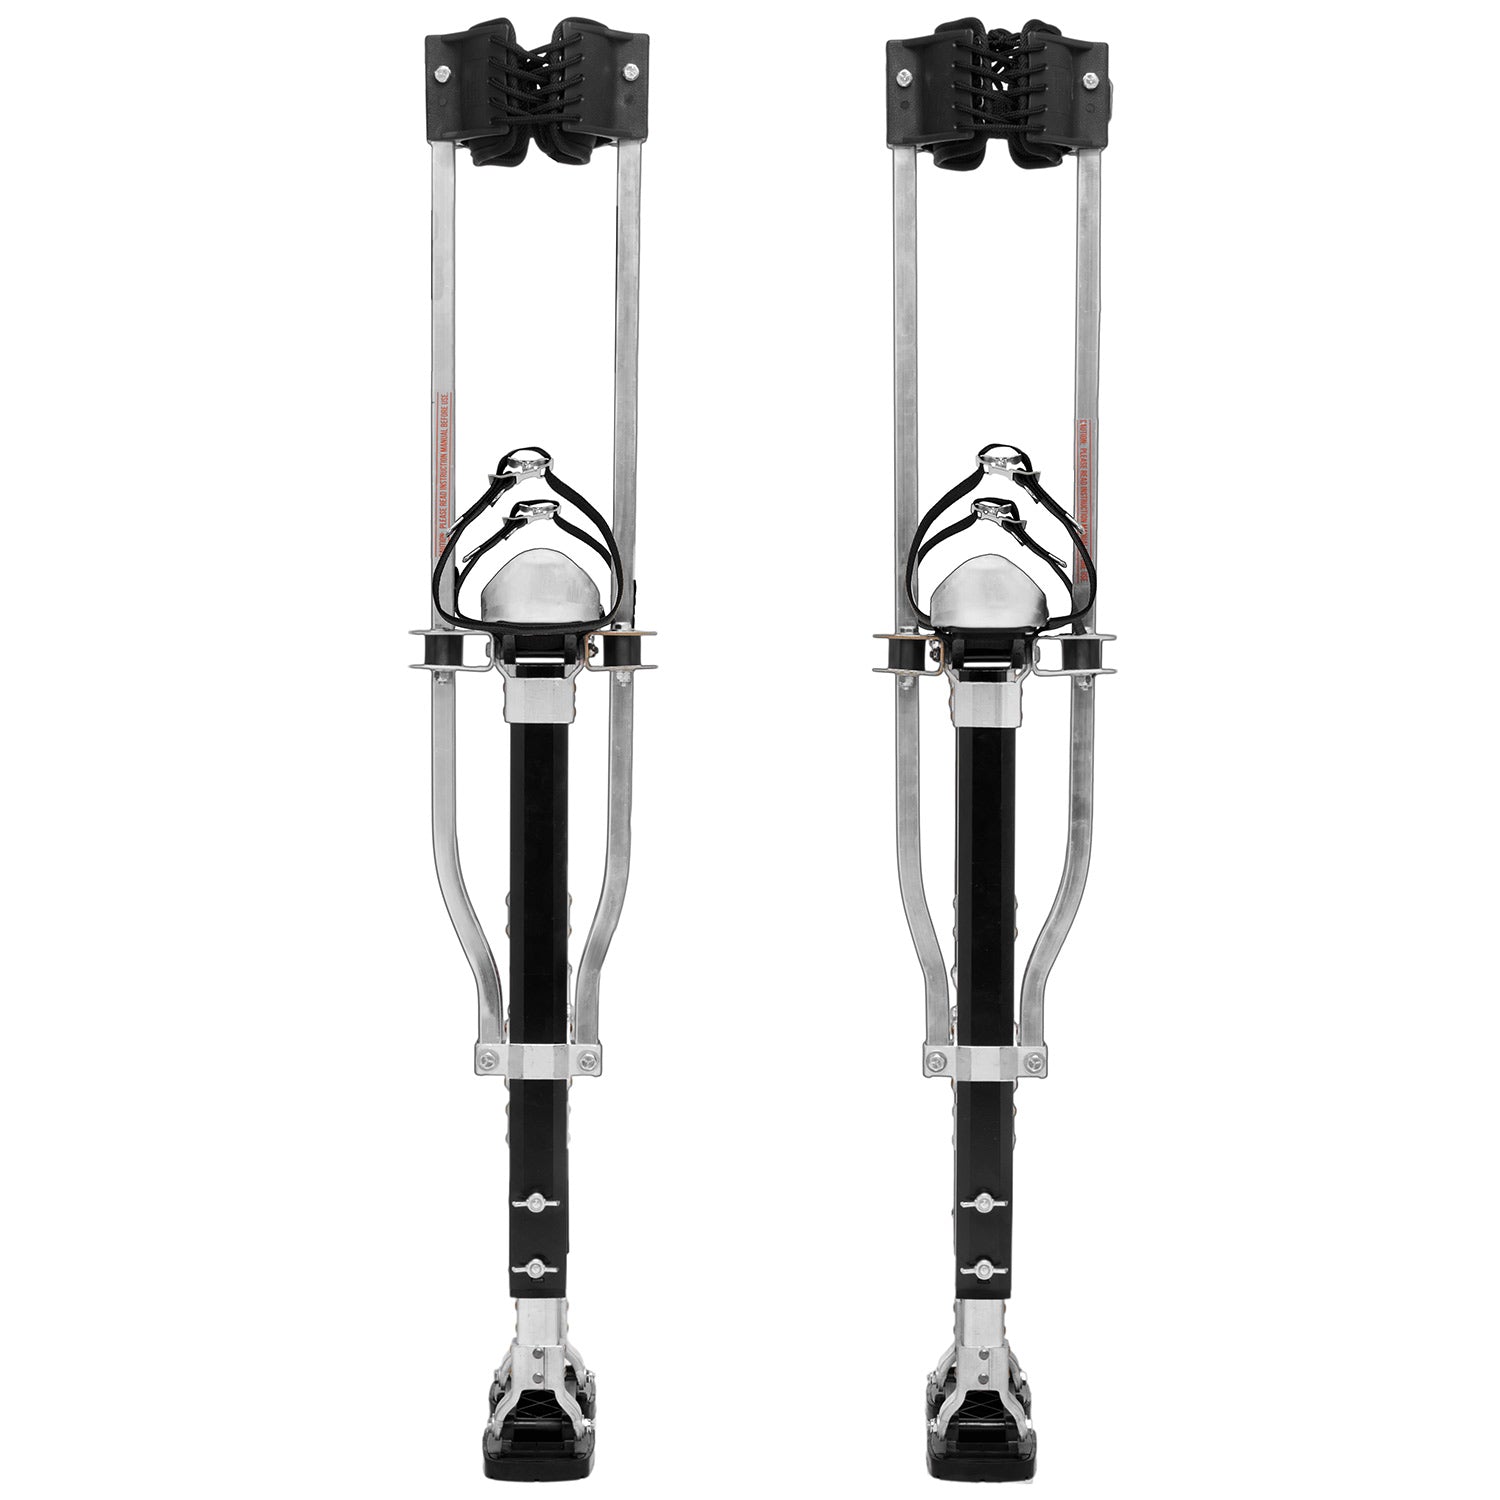 Double sided S2 Magnesium stilts offer great balance and security